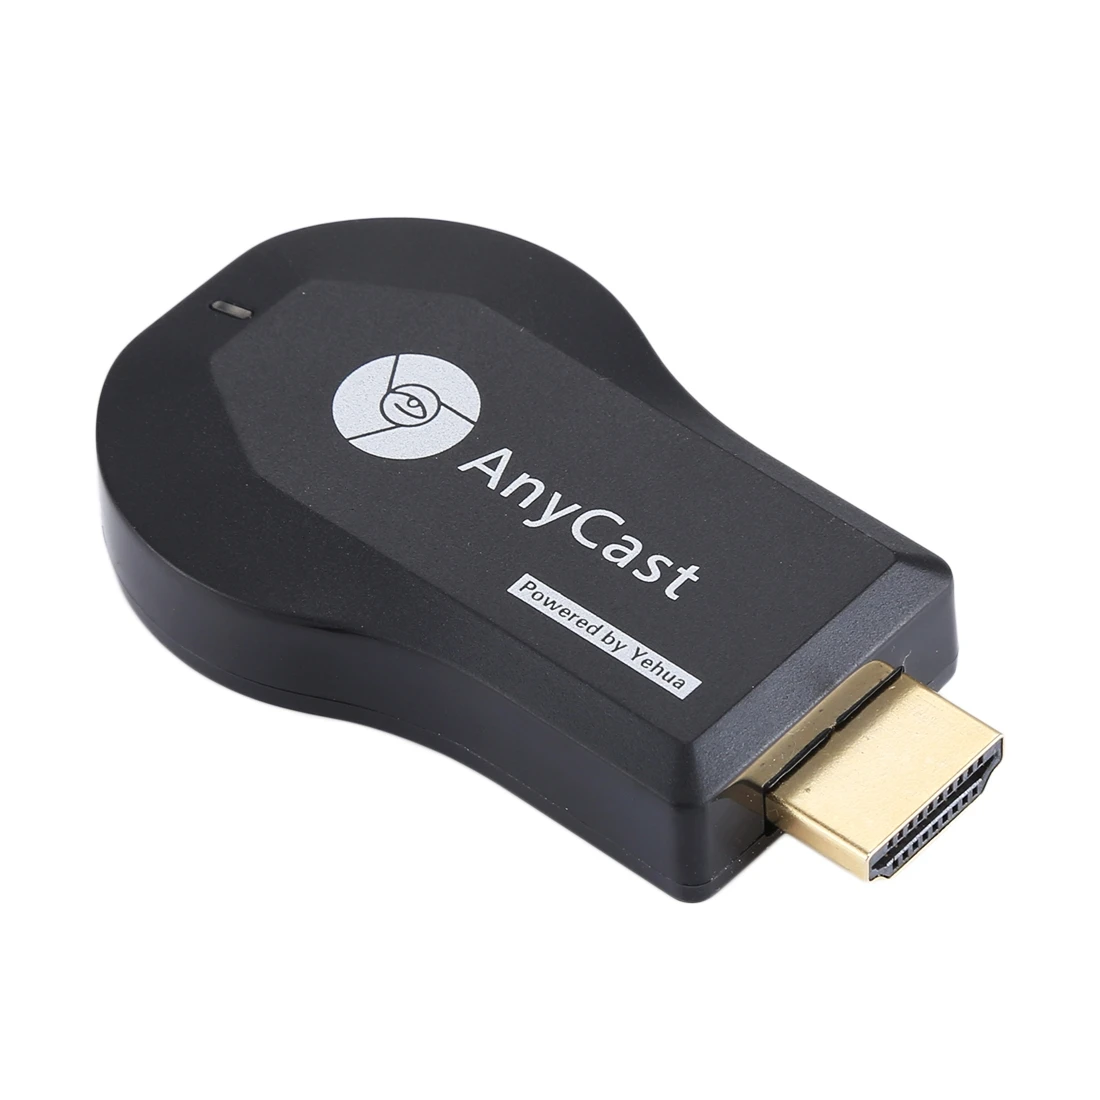 

Dropshipping AnyCast M4 Plus Wireless WiFi Display Dongle Receiver Airplay Miracast DLNA 1080P TV Stick for Smartphones